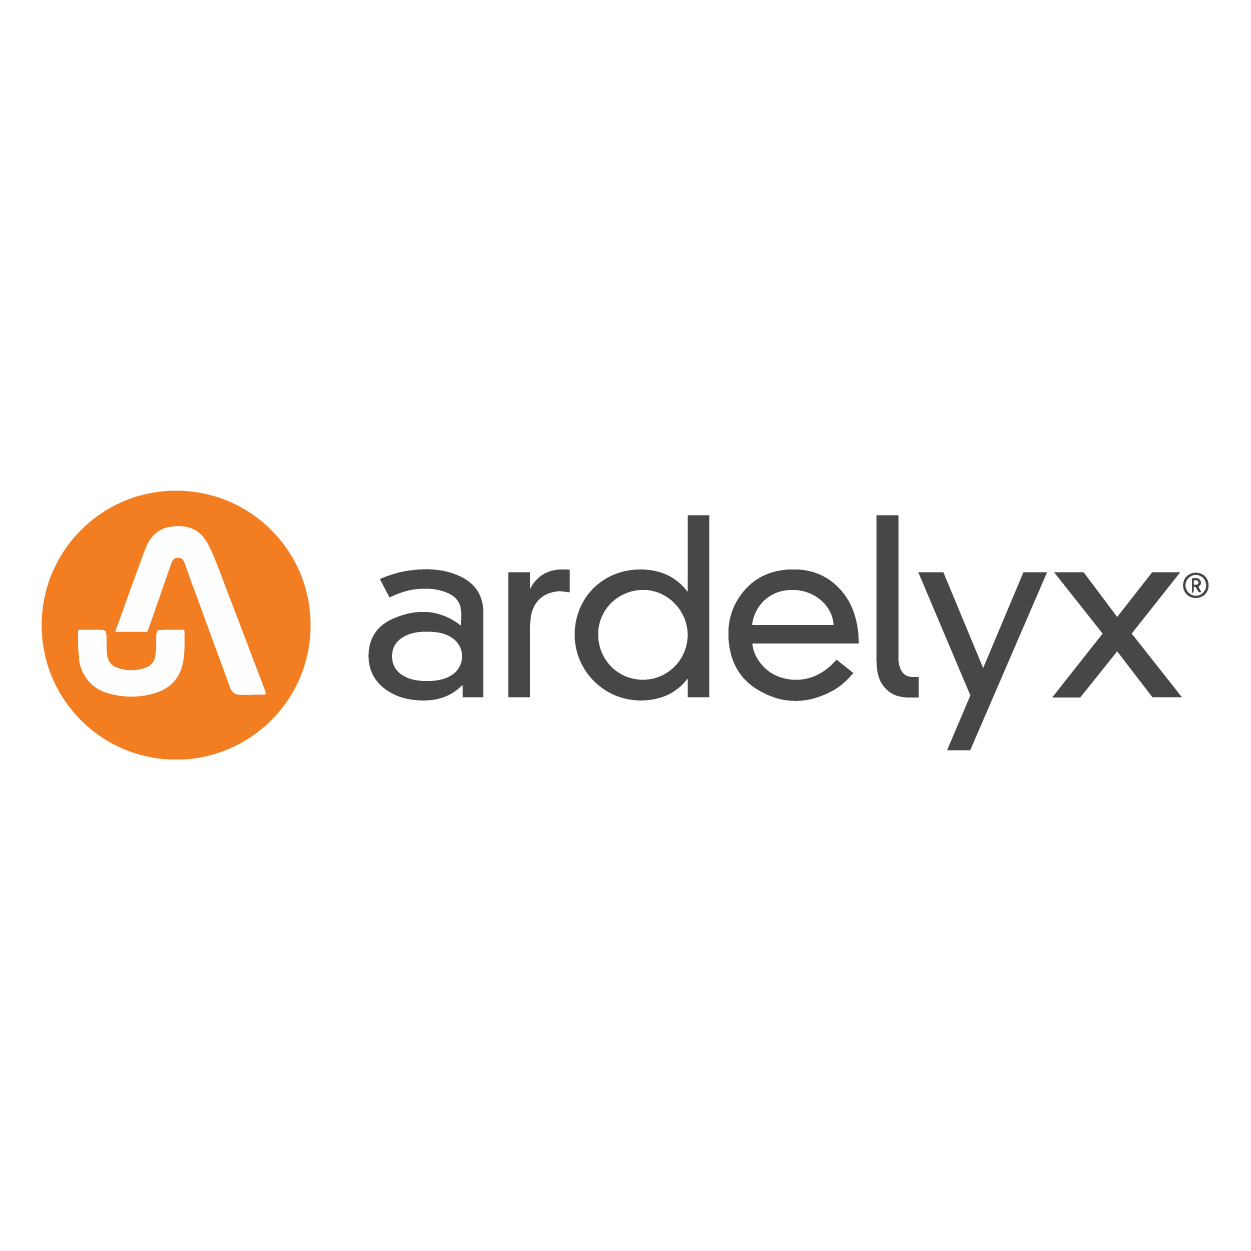 Despite Concerns, FDA Advisory Committee Votes In Favor Of Ardelyx's Kidney Disease Candidate